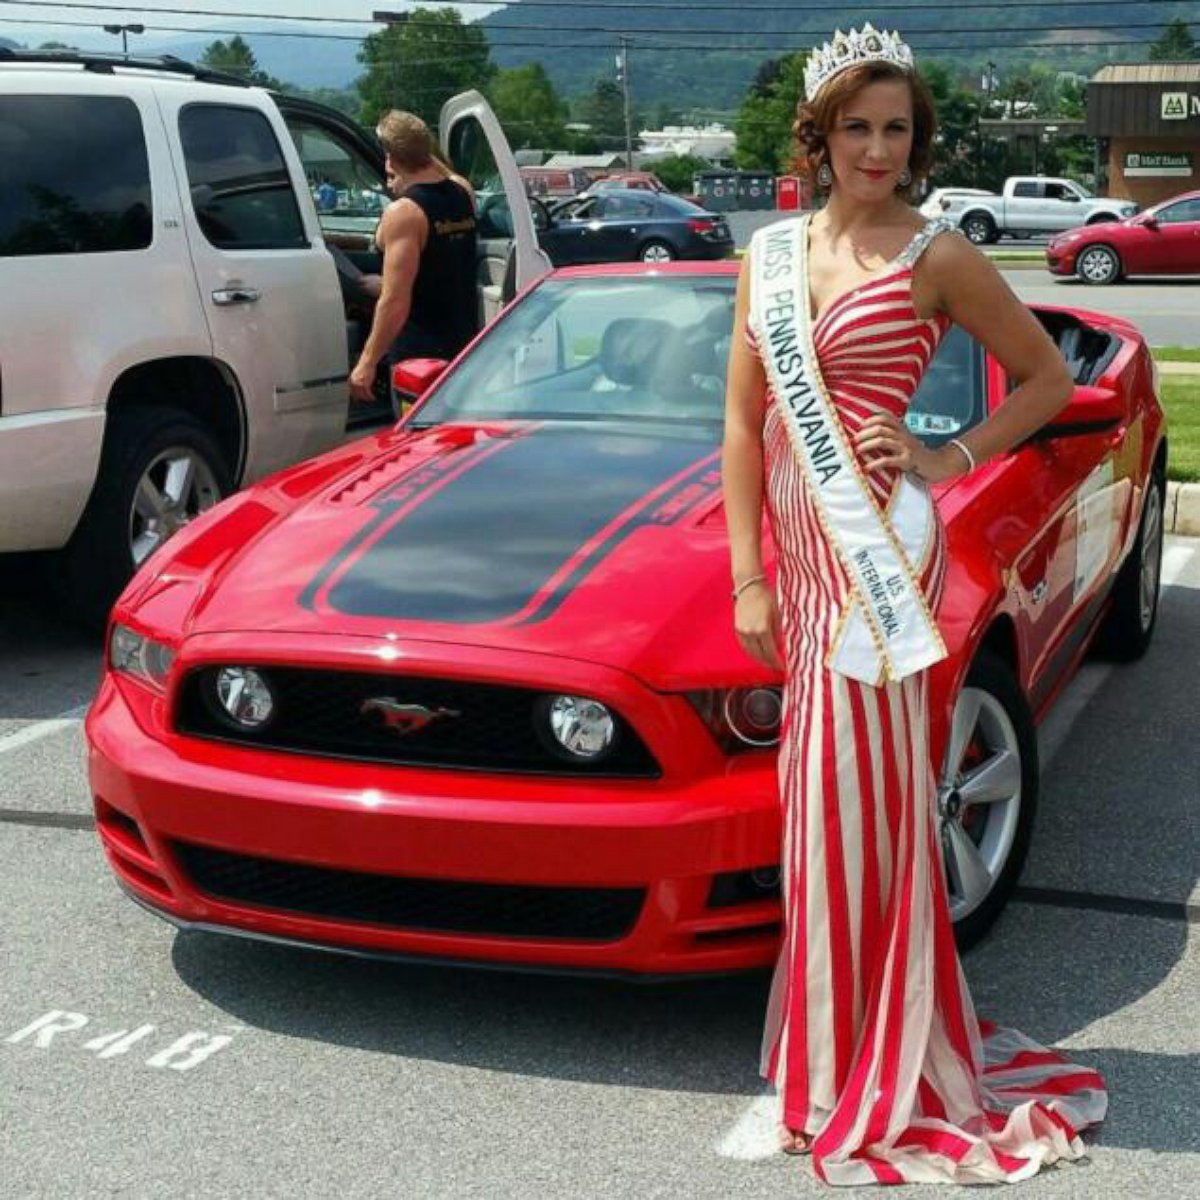 PHOTO: This undated photo was posted to the Facebook page of Brandi Lee Weaver-Gates, a former Miss Pennsylvania U.S. International pageant winner, who was arrested on Aug. 11, 2015 in Bellefonte, Penn.